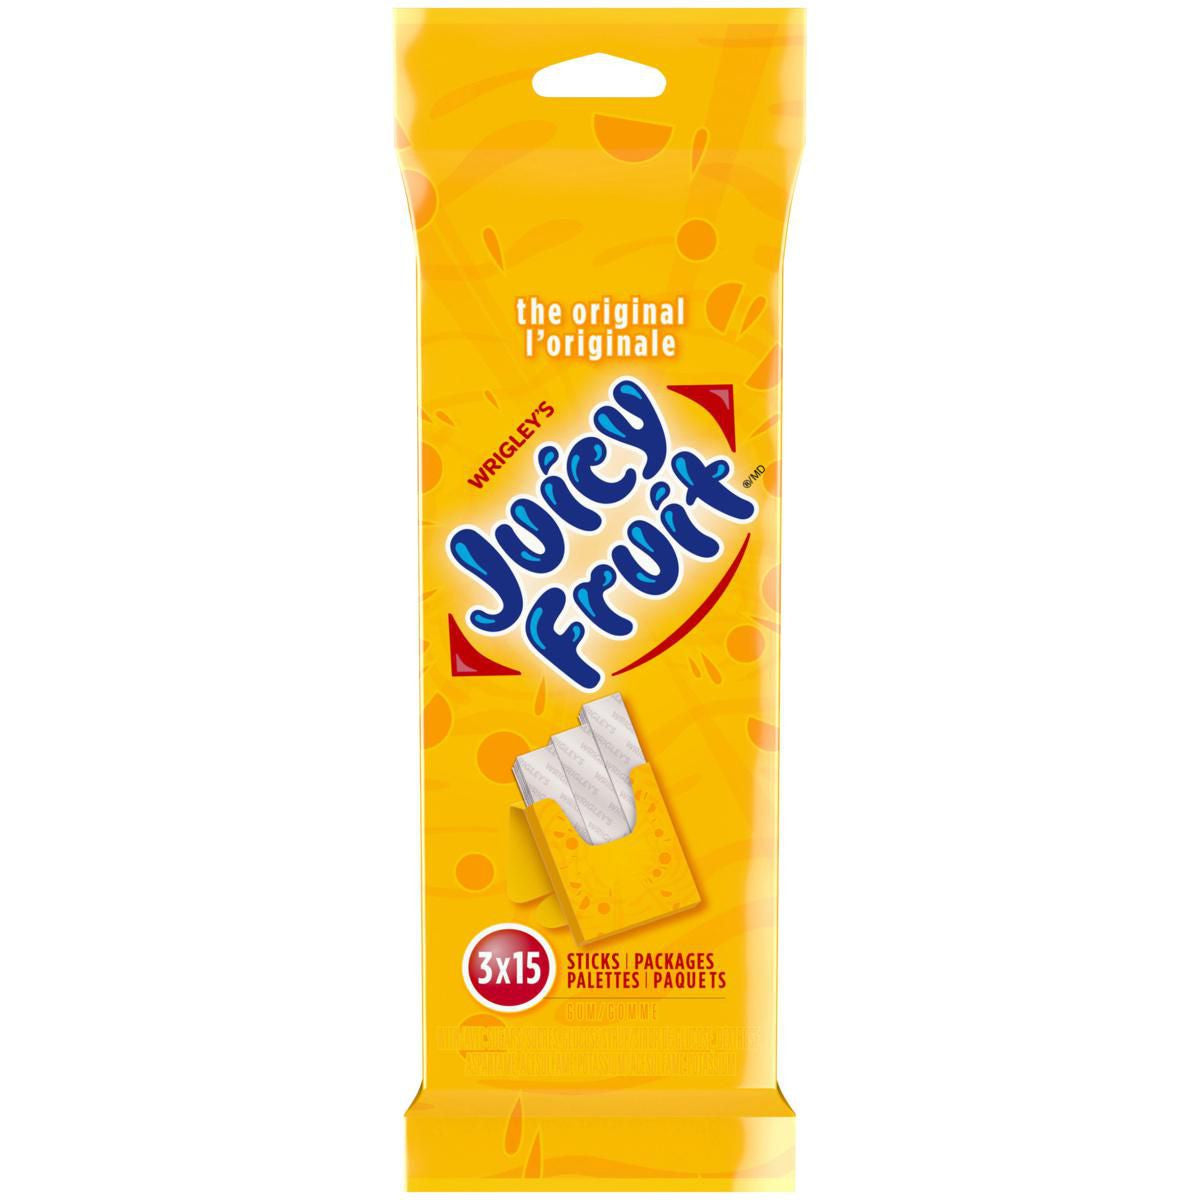 Juicy Fruit Sugar-Free Gum, The Original, 3-Pack, 15 Sticks {Imported from Canada}